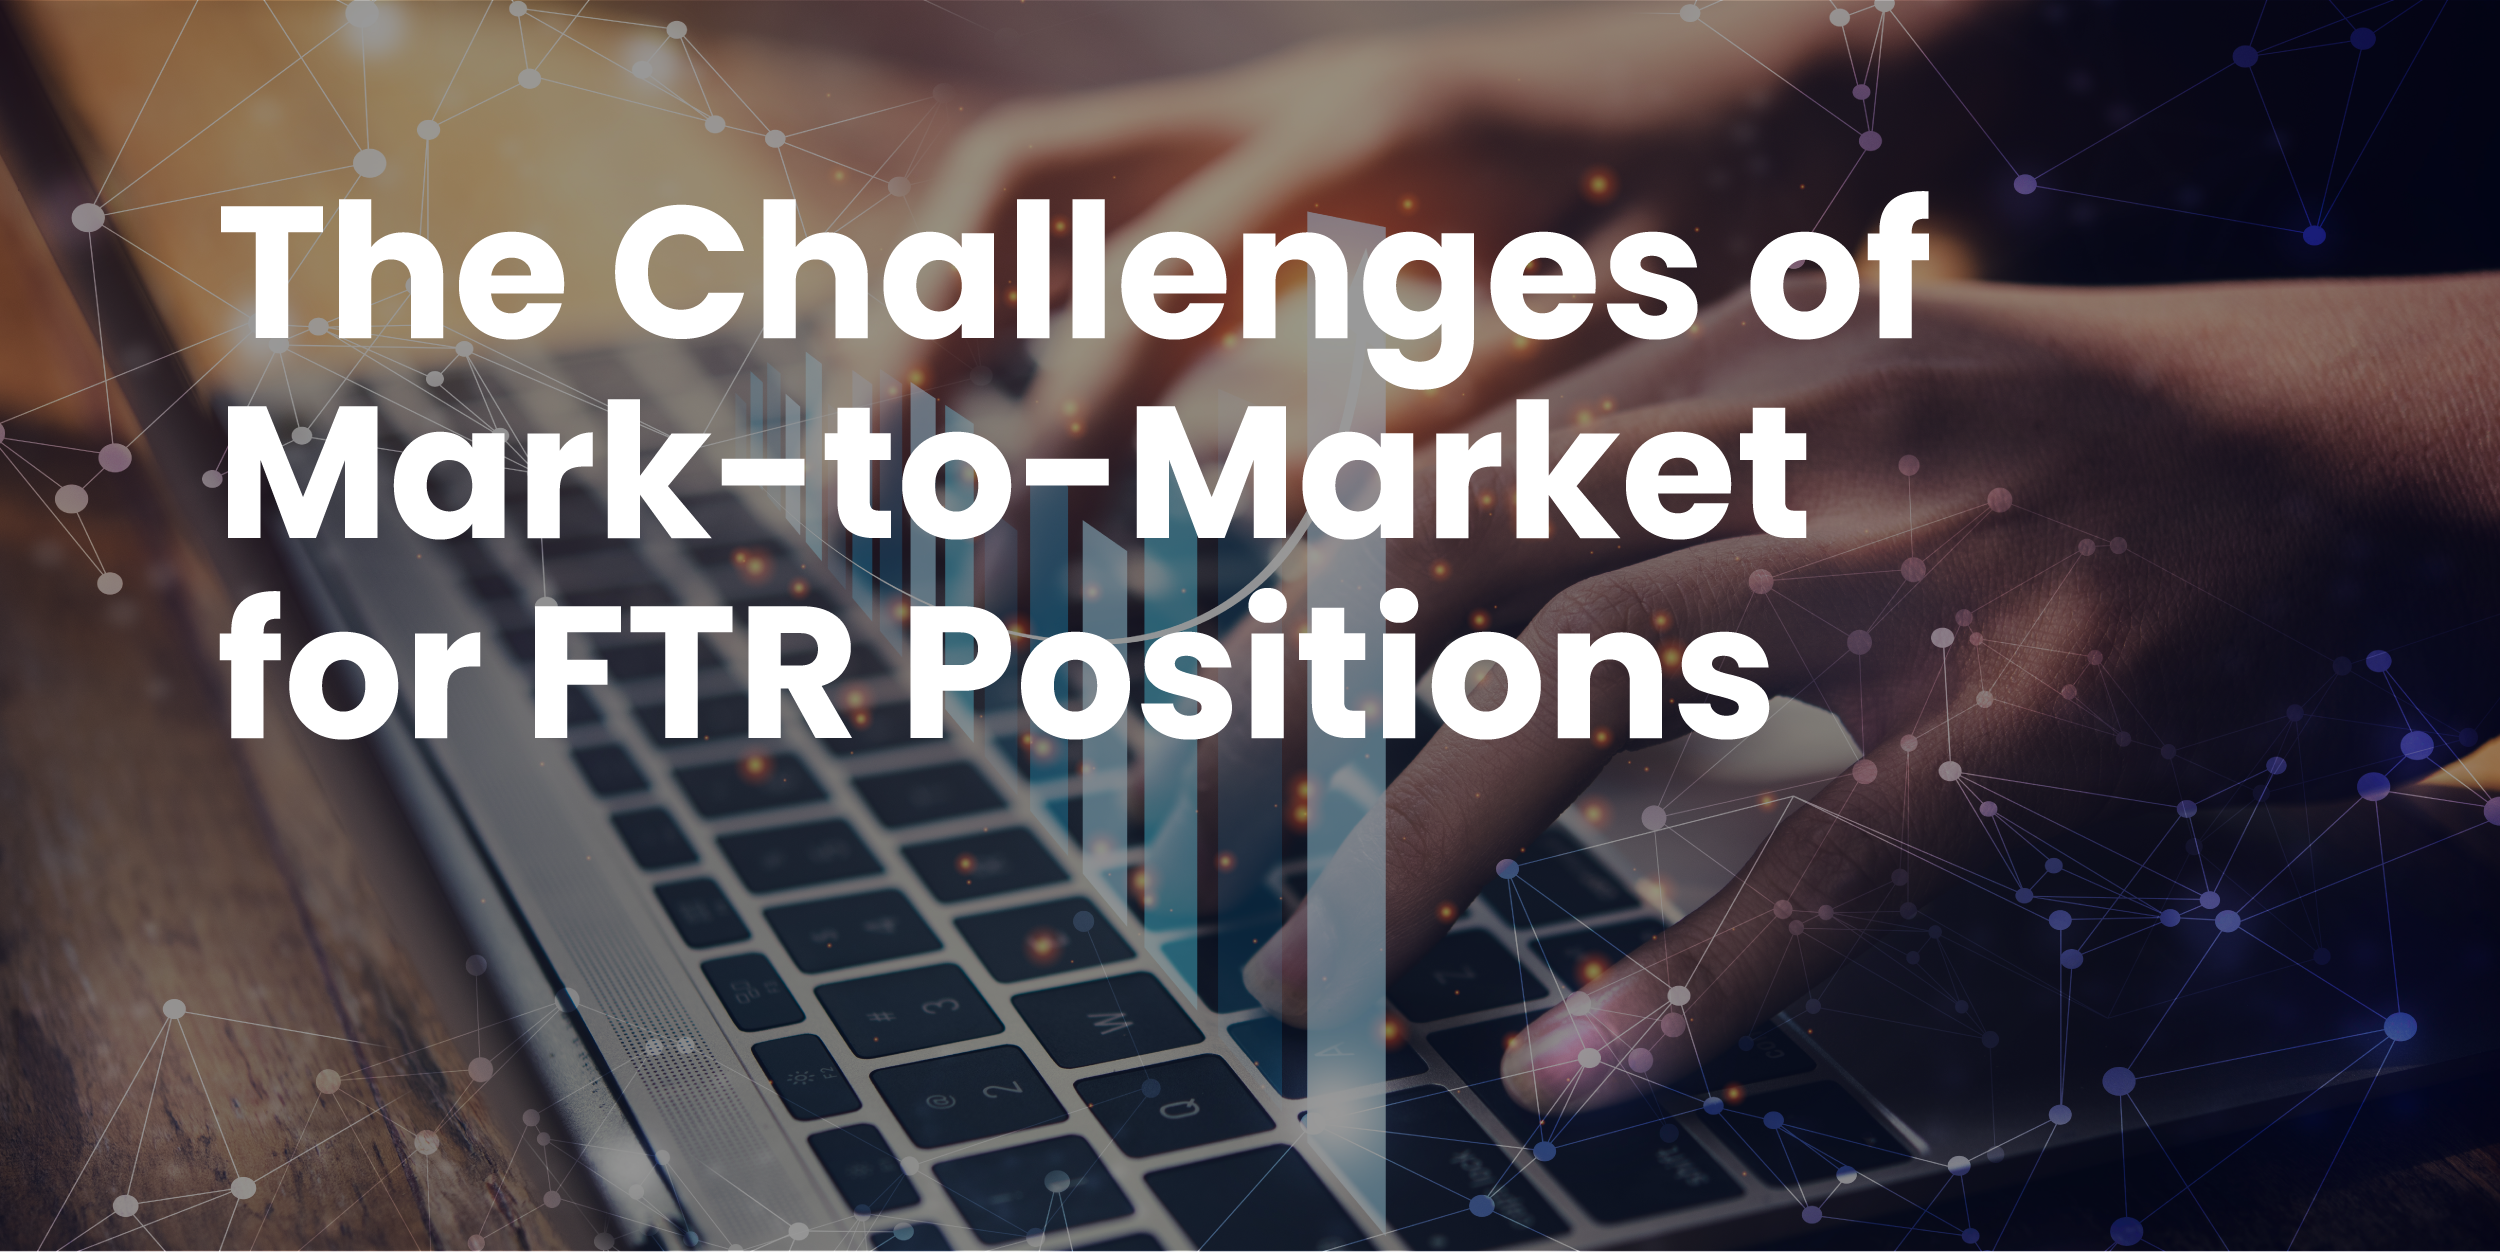 The challenges of mark-to-market for FTR positions